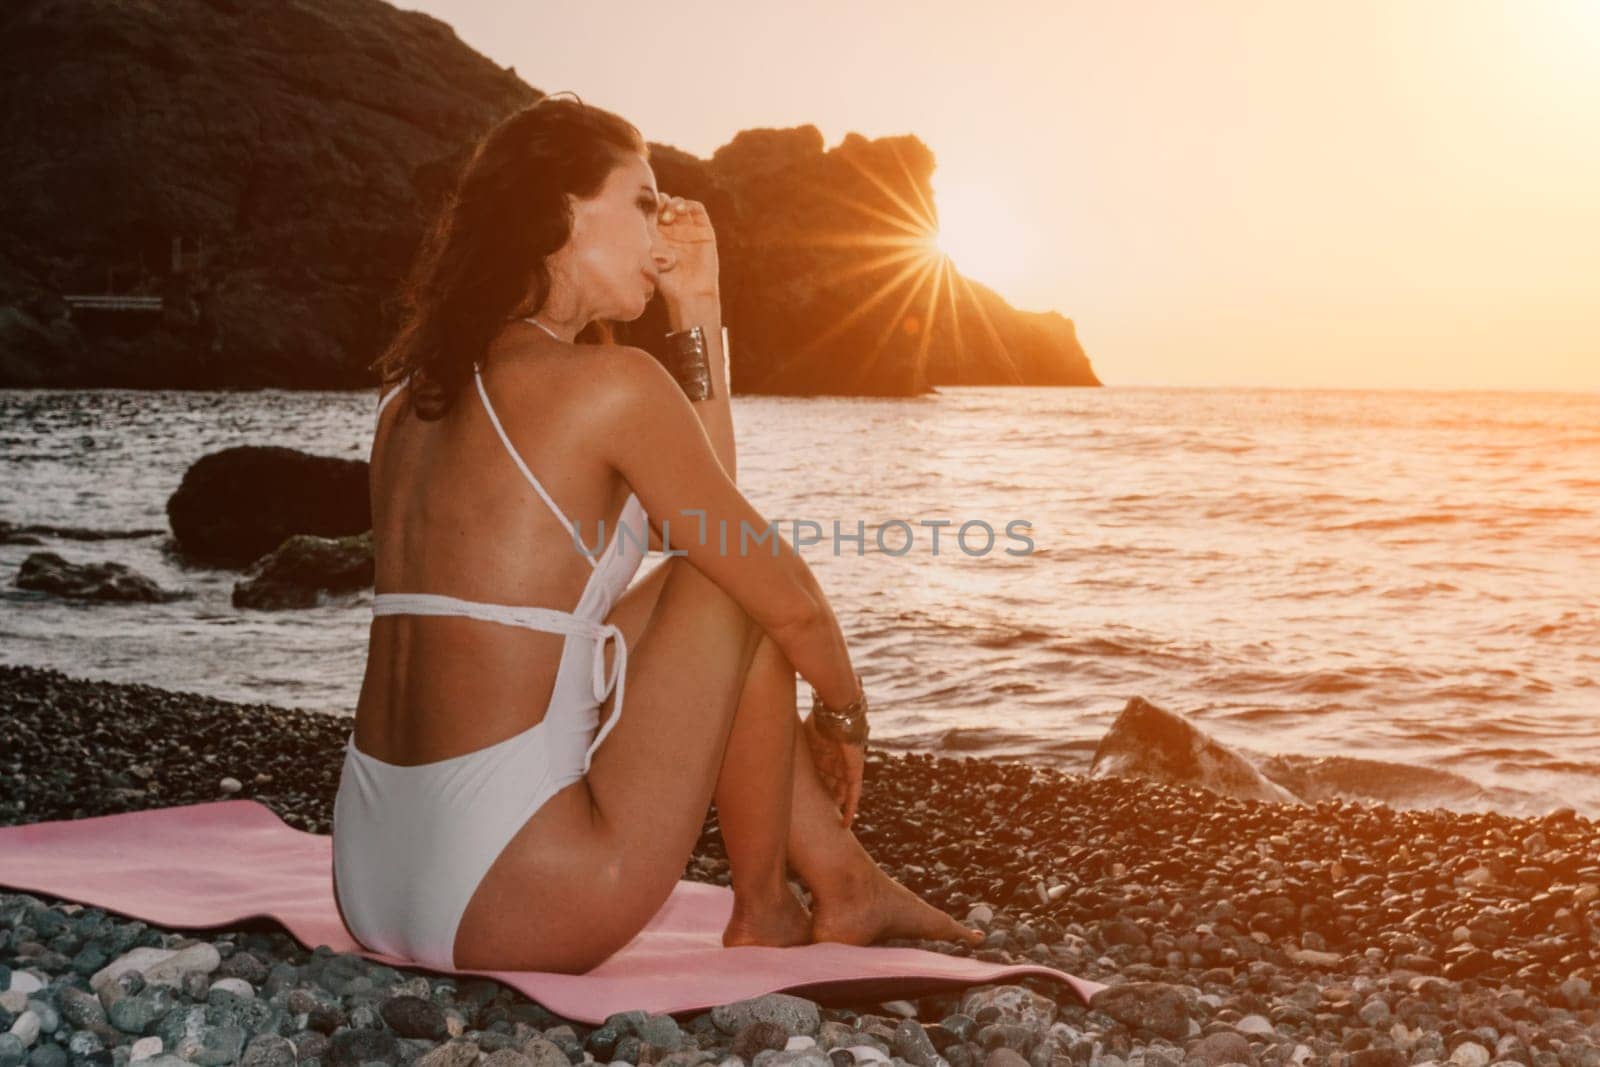 Woman sea yoga. Happy woman meditating in yoga pose on sunset beach, ocean and rock mountains. Motivation and inspirational fit and exercising. Healthy lifestyle outdoors in nature, fitness concept. by panophotograph